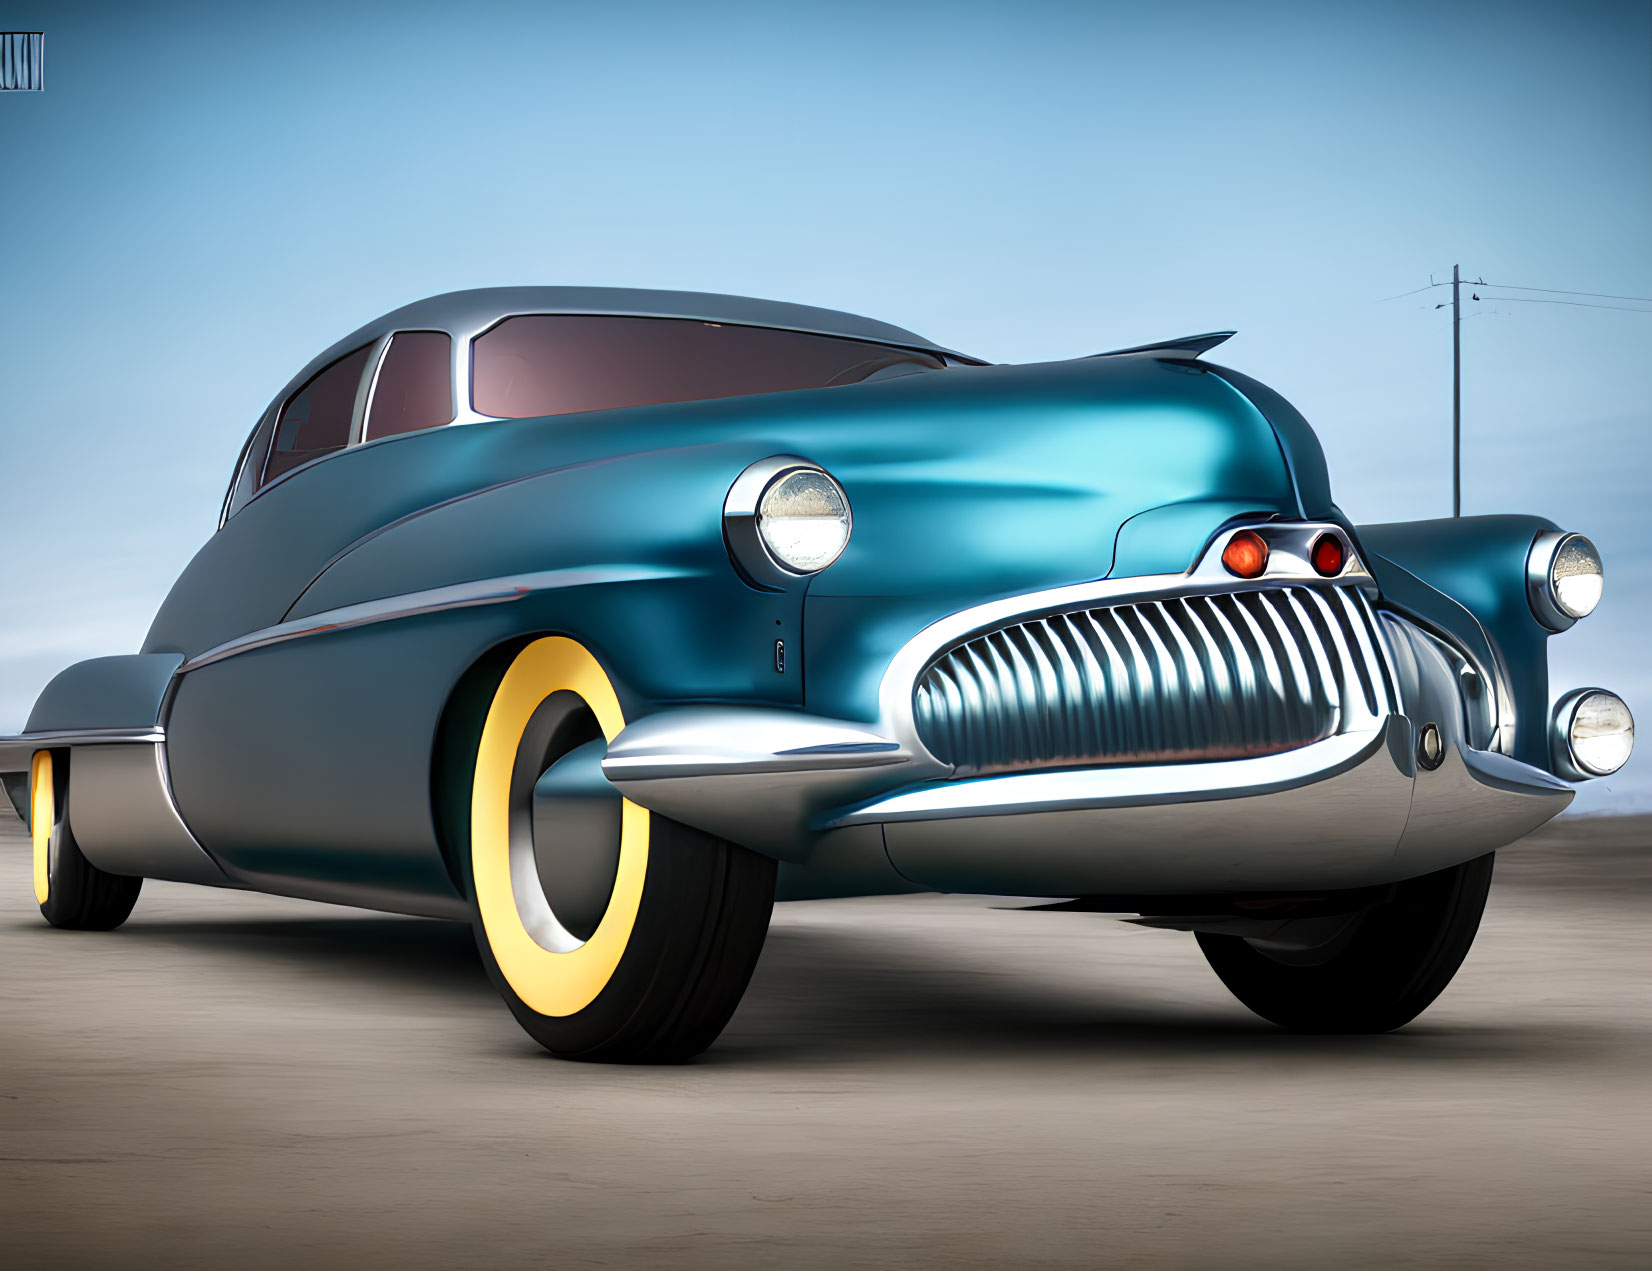 Streamlined Retro-Futuristic Car with Blue Body and Yellow-Rimmed Tires